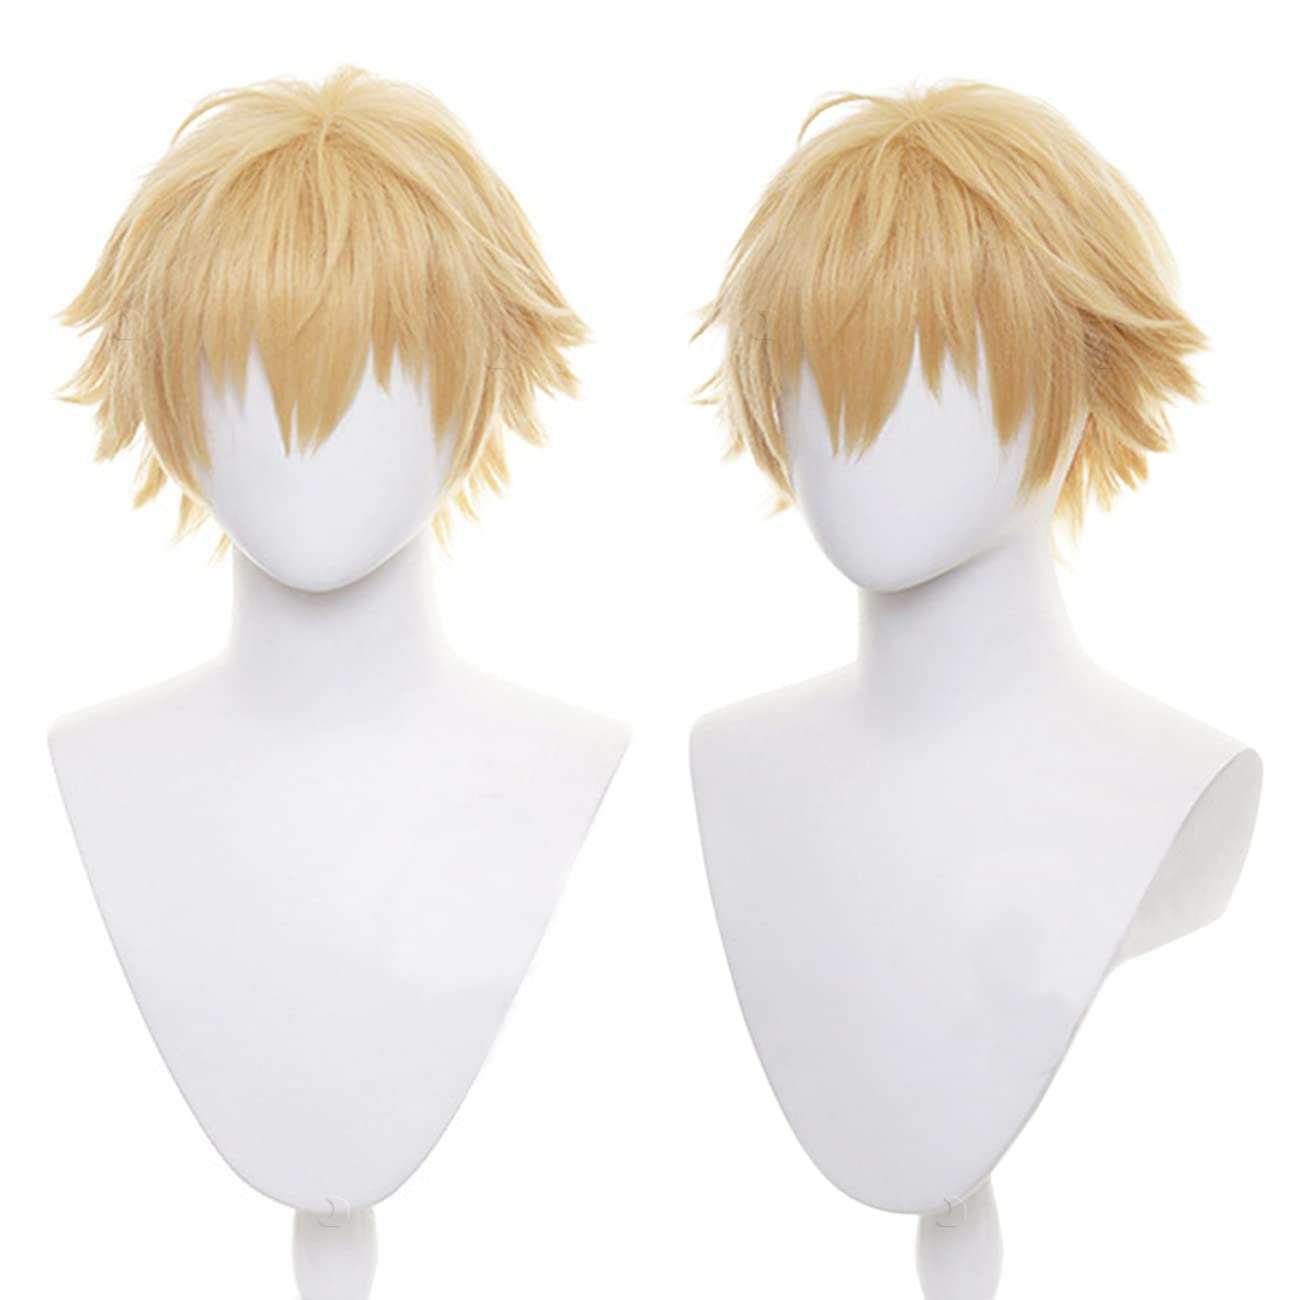 Denji Chainsaw Man Cosplay, Denji Mask Anime Latex Head Cover Mask for  Cosplay Party